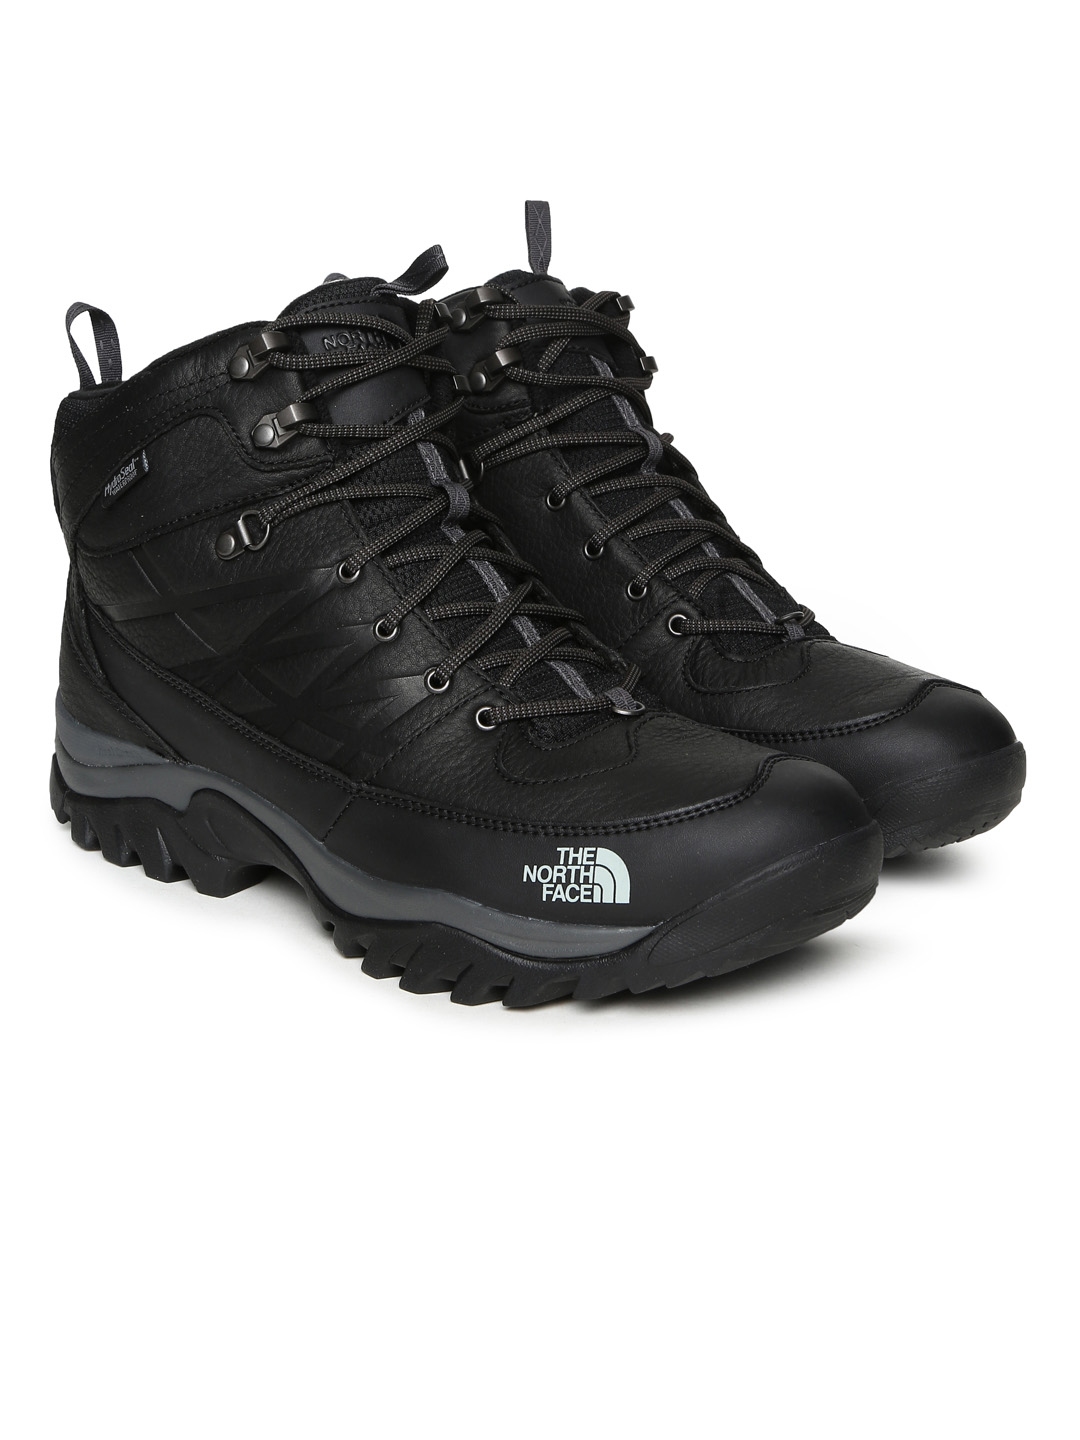 Buy The North Face Men Black Leather High Top Waterproof M Storm Winter